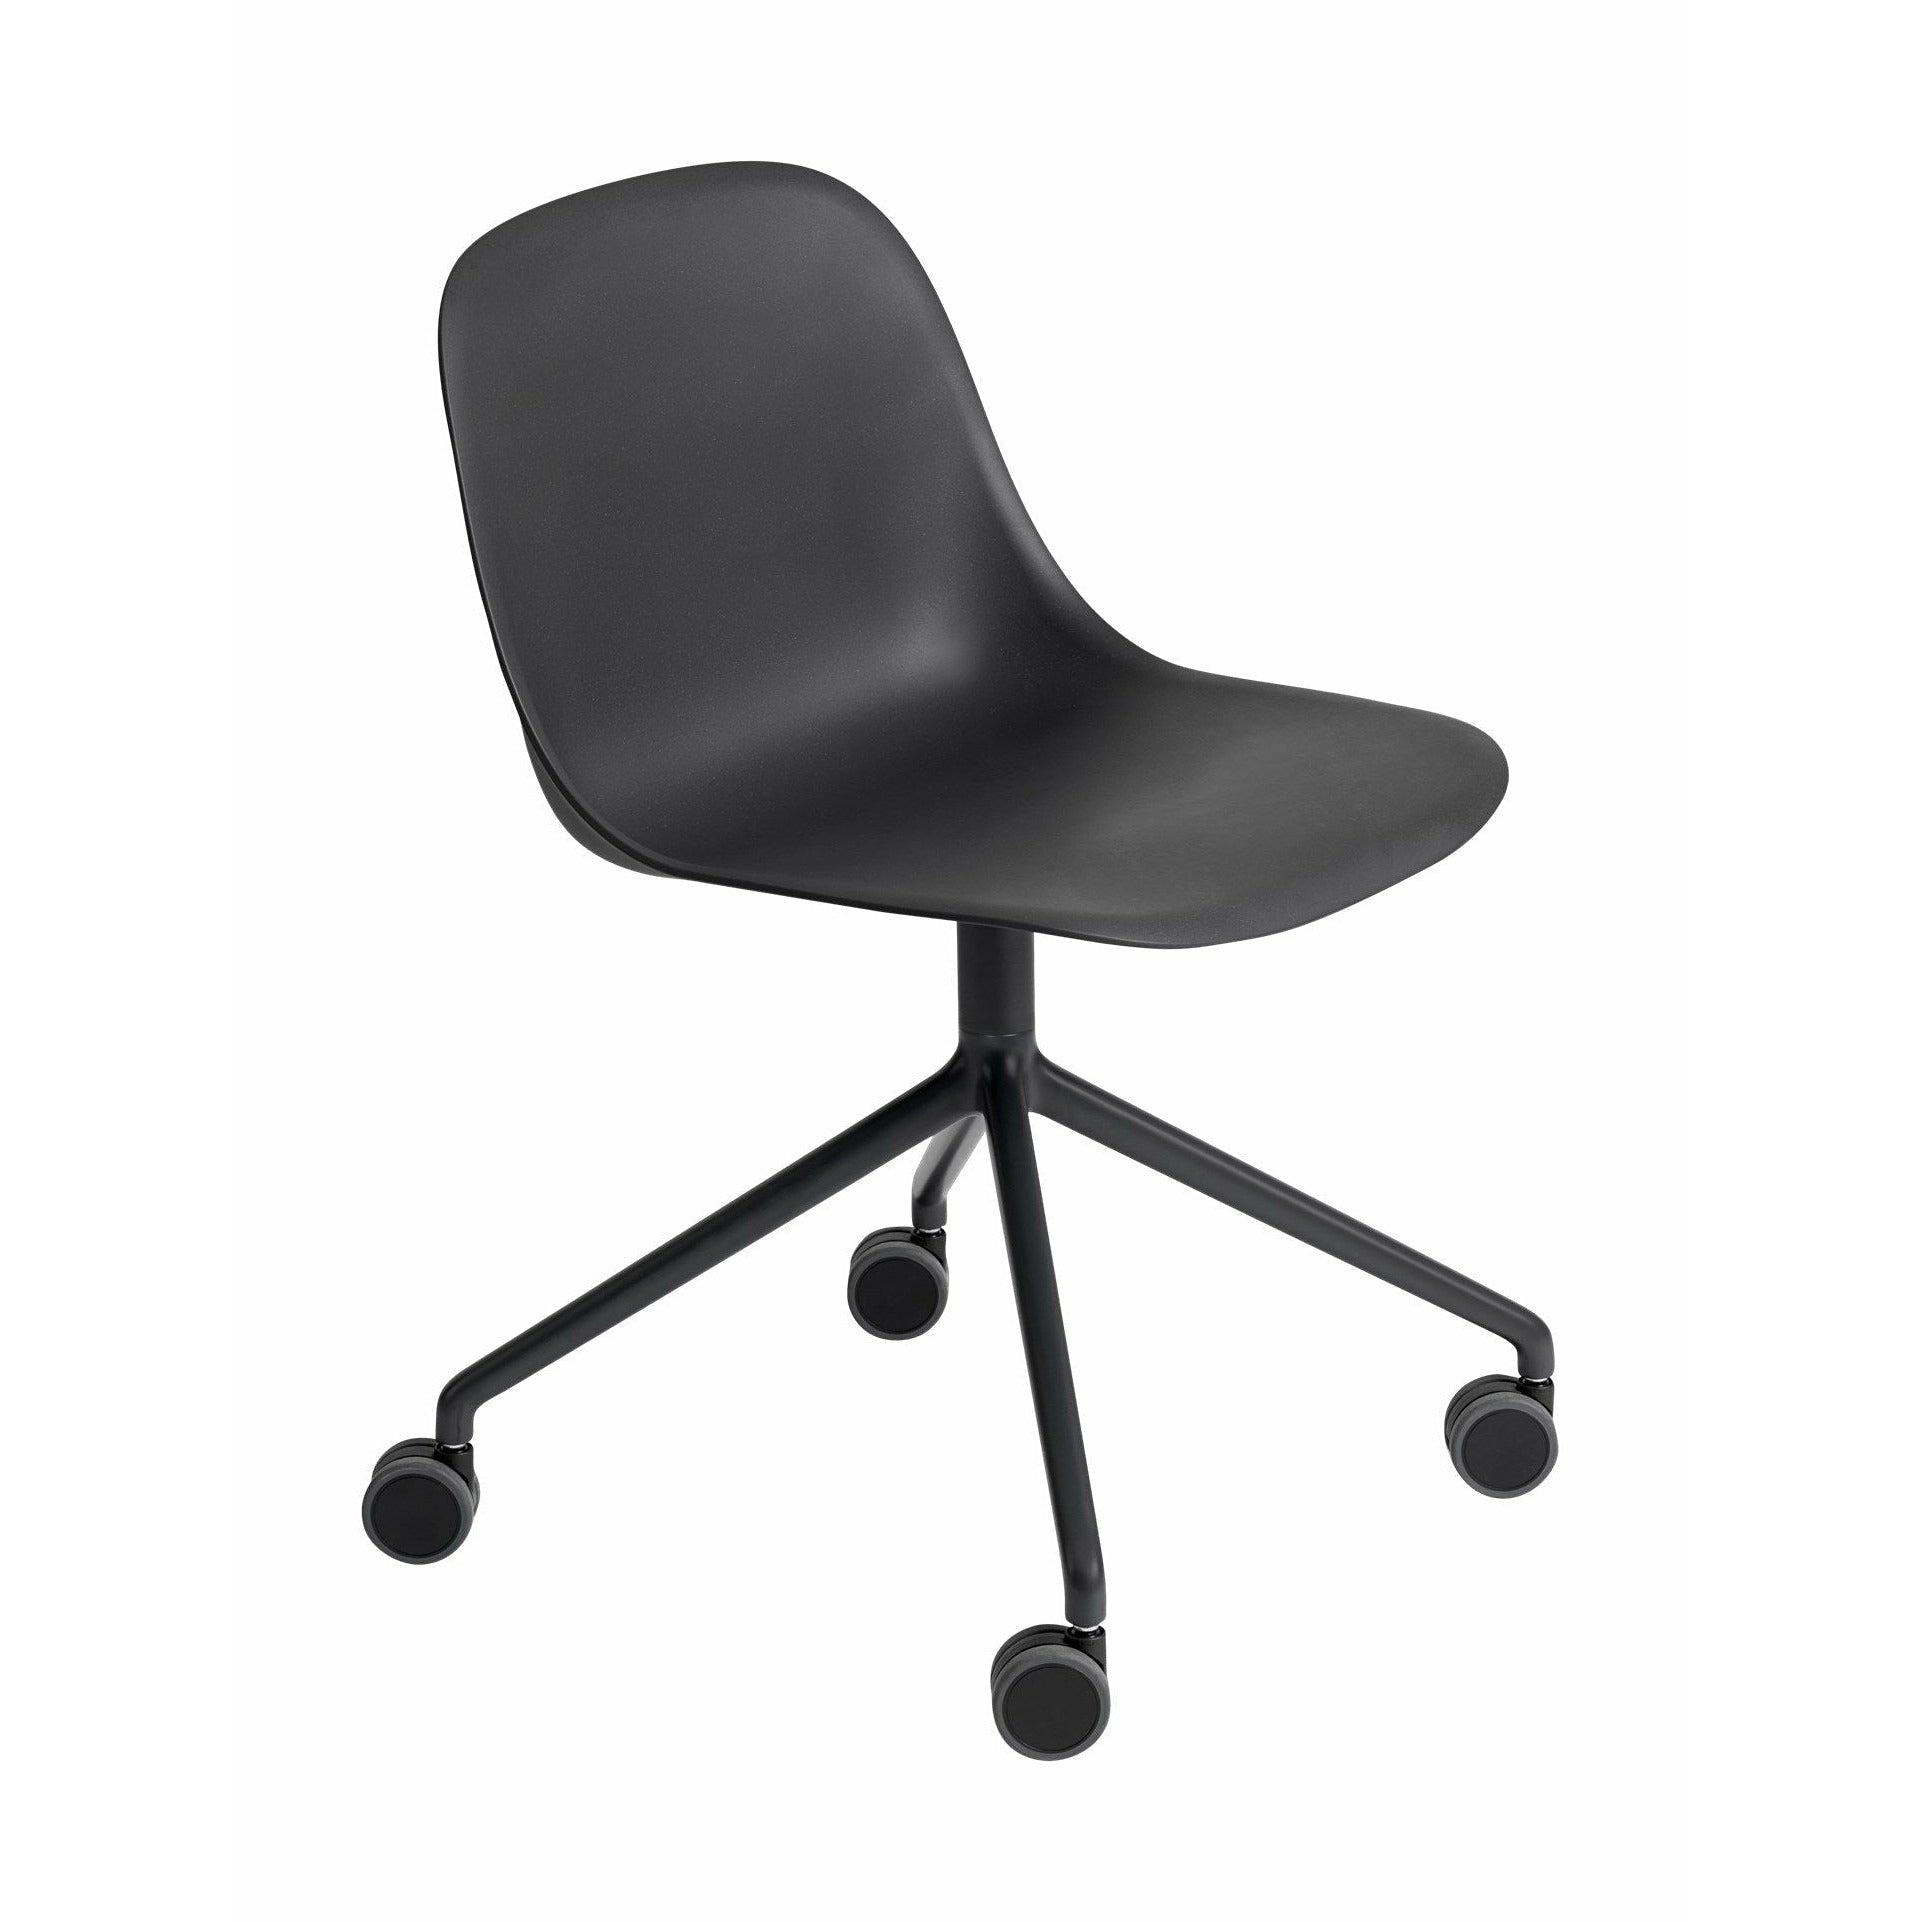 Muuto Fiber Side Chair Made Of Recycled Plastic Swivel With Wheels, Black/Black